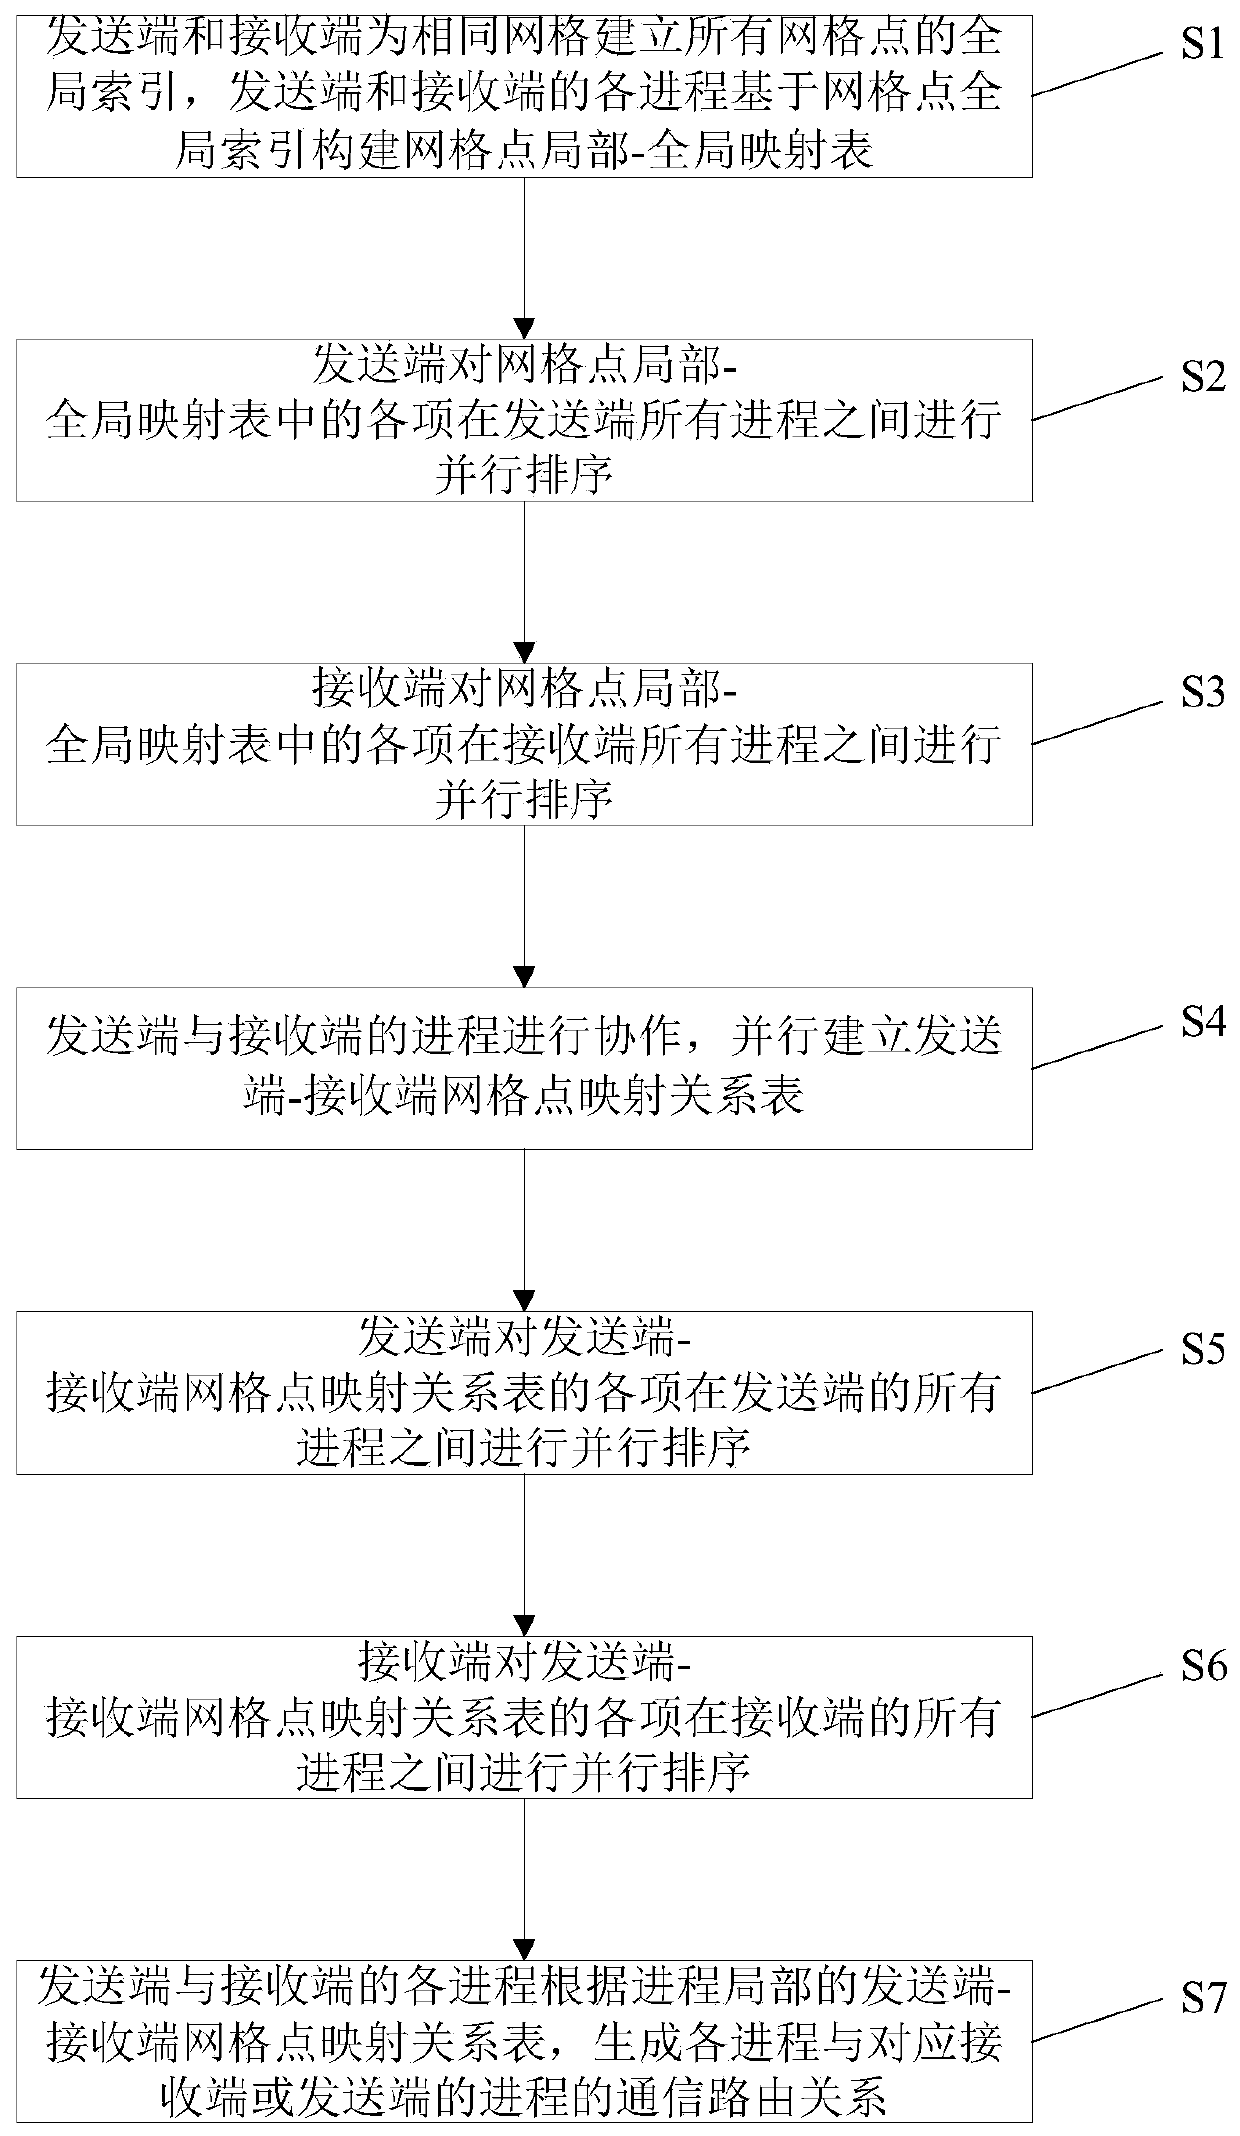 Parallel communication route establishing method and system